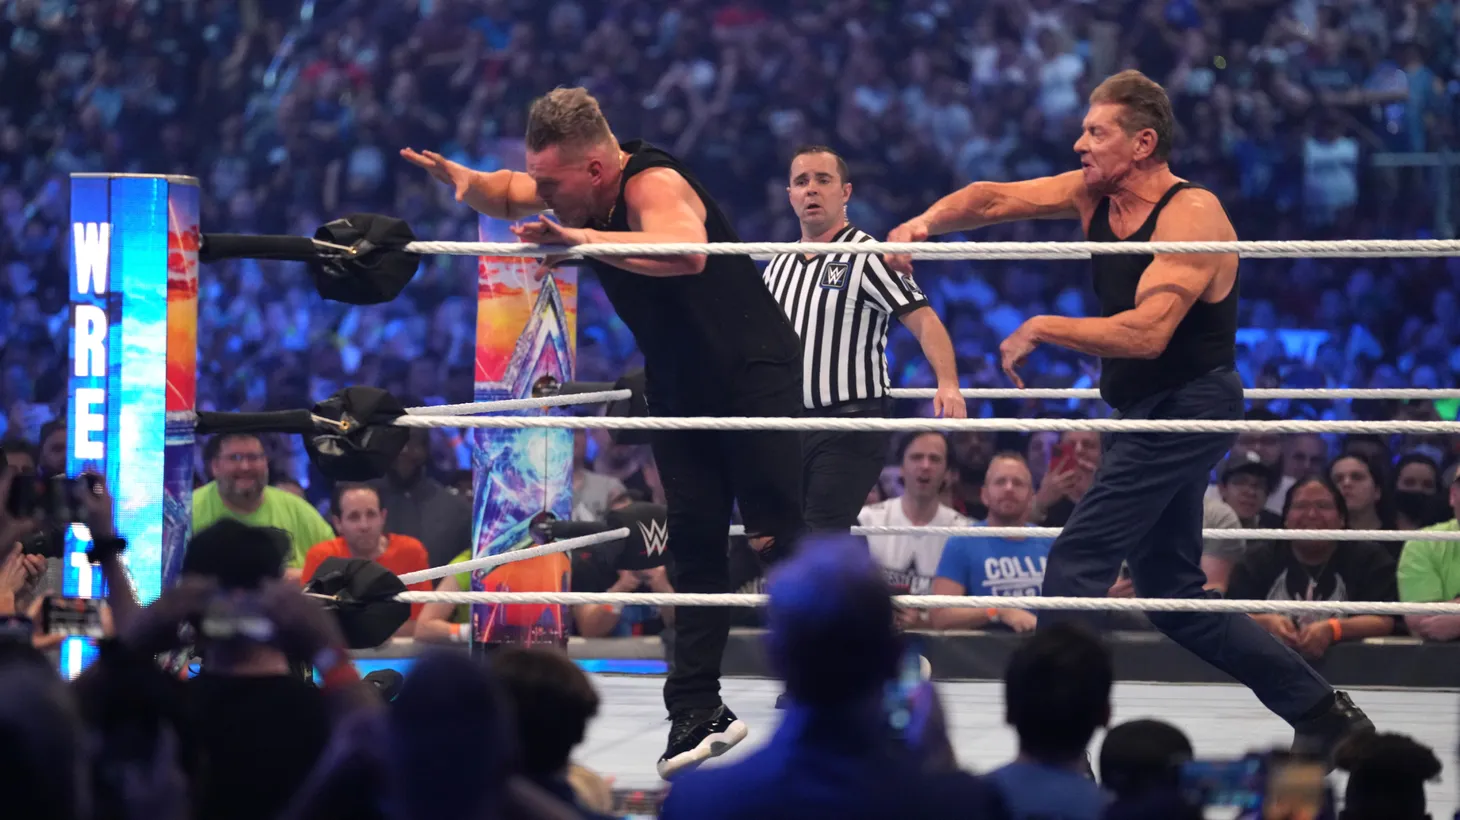 Pat McAfee (left) and WWE owner Vince McMahon wrestle during WrestleMania at AT&T Stadium, Arlington, TX, Apr. 3, 2022. \